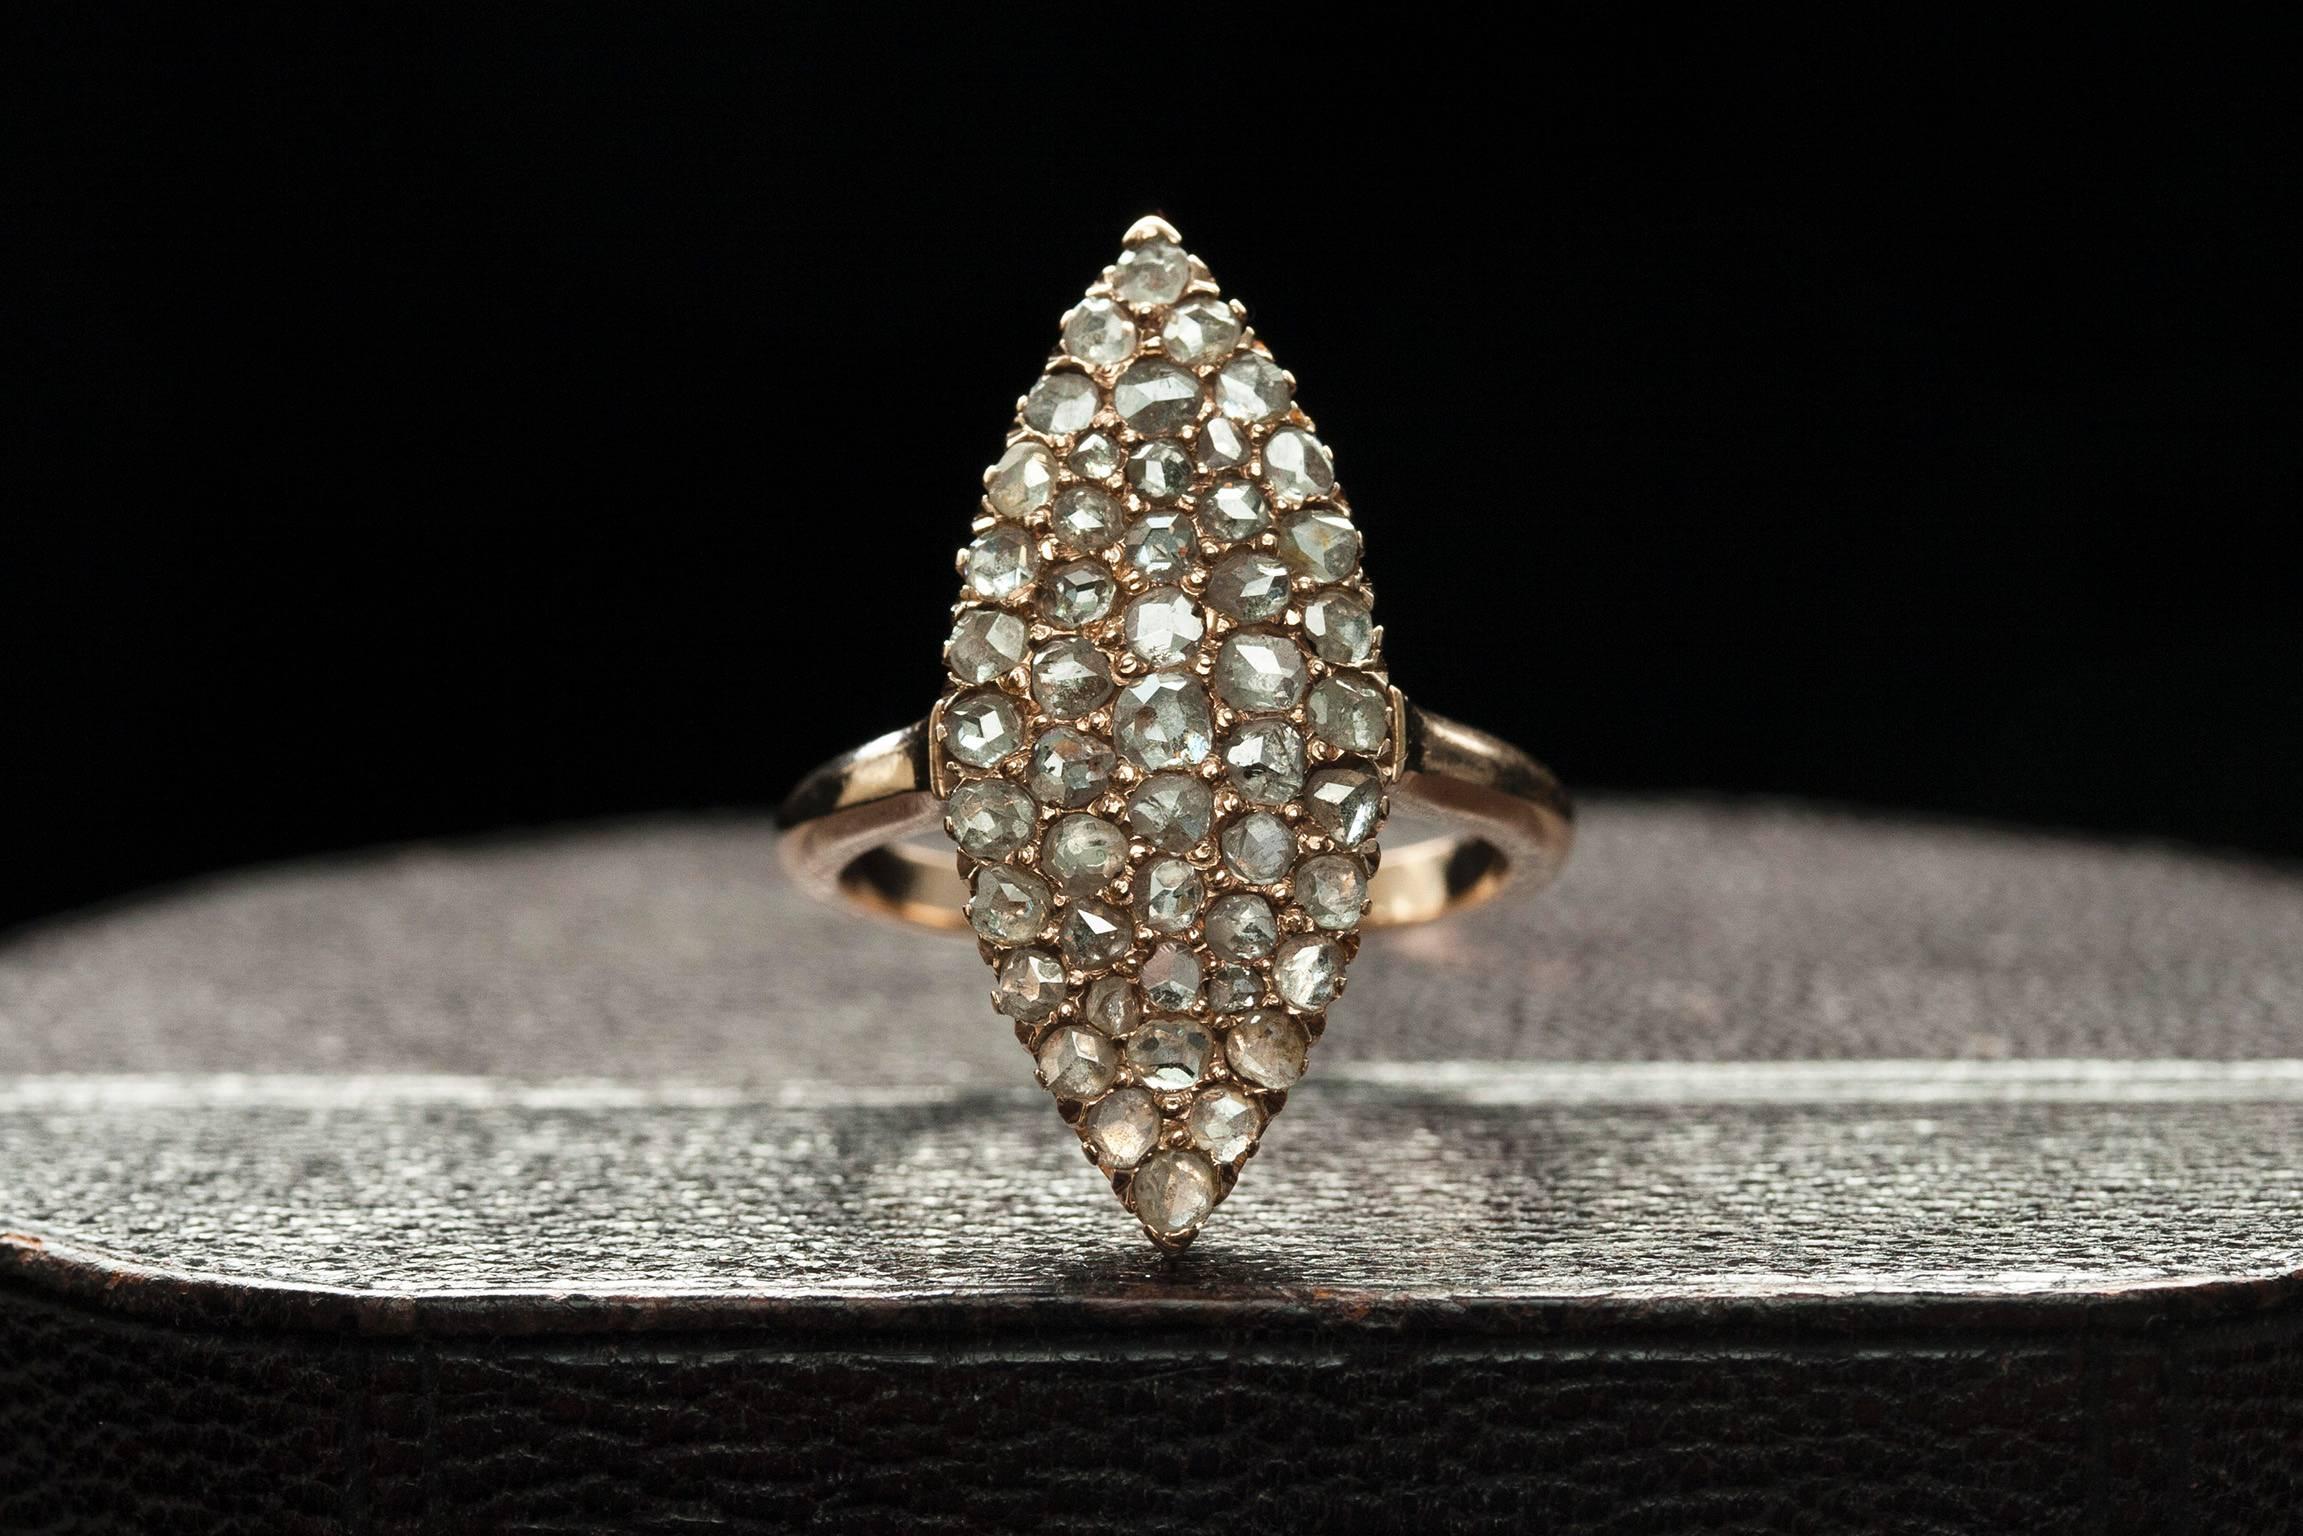 C.1880. A large and impressive Navette-shaped Victorian ring in a cluster of light grey-toned rose cut diamonds. The stones sparkle beautifully in pavé setting, and the rose gold shank matches the ring with a more subtle beauty. The navette/marquis